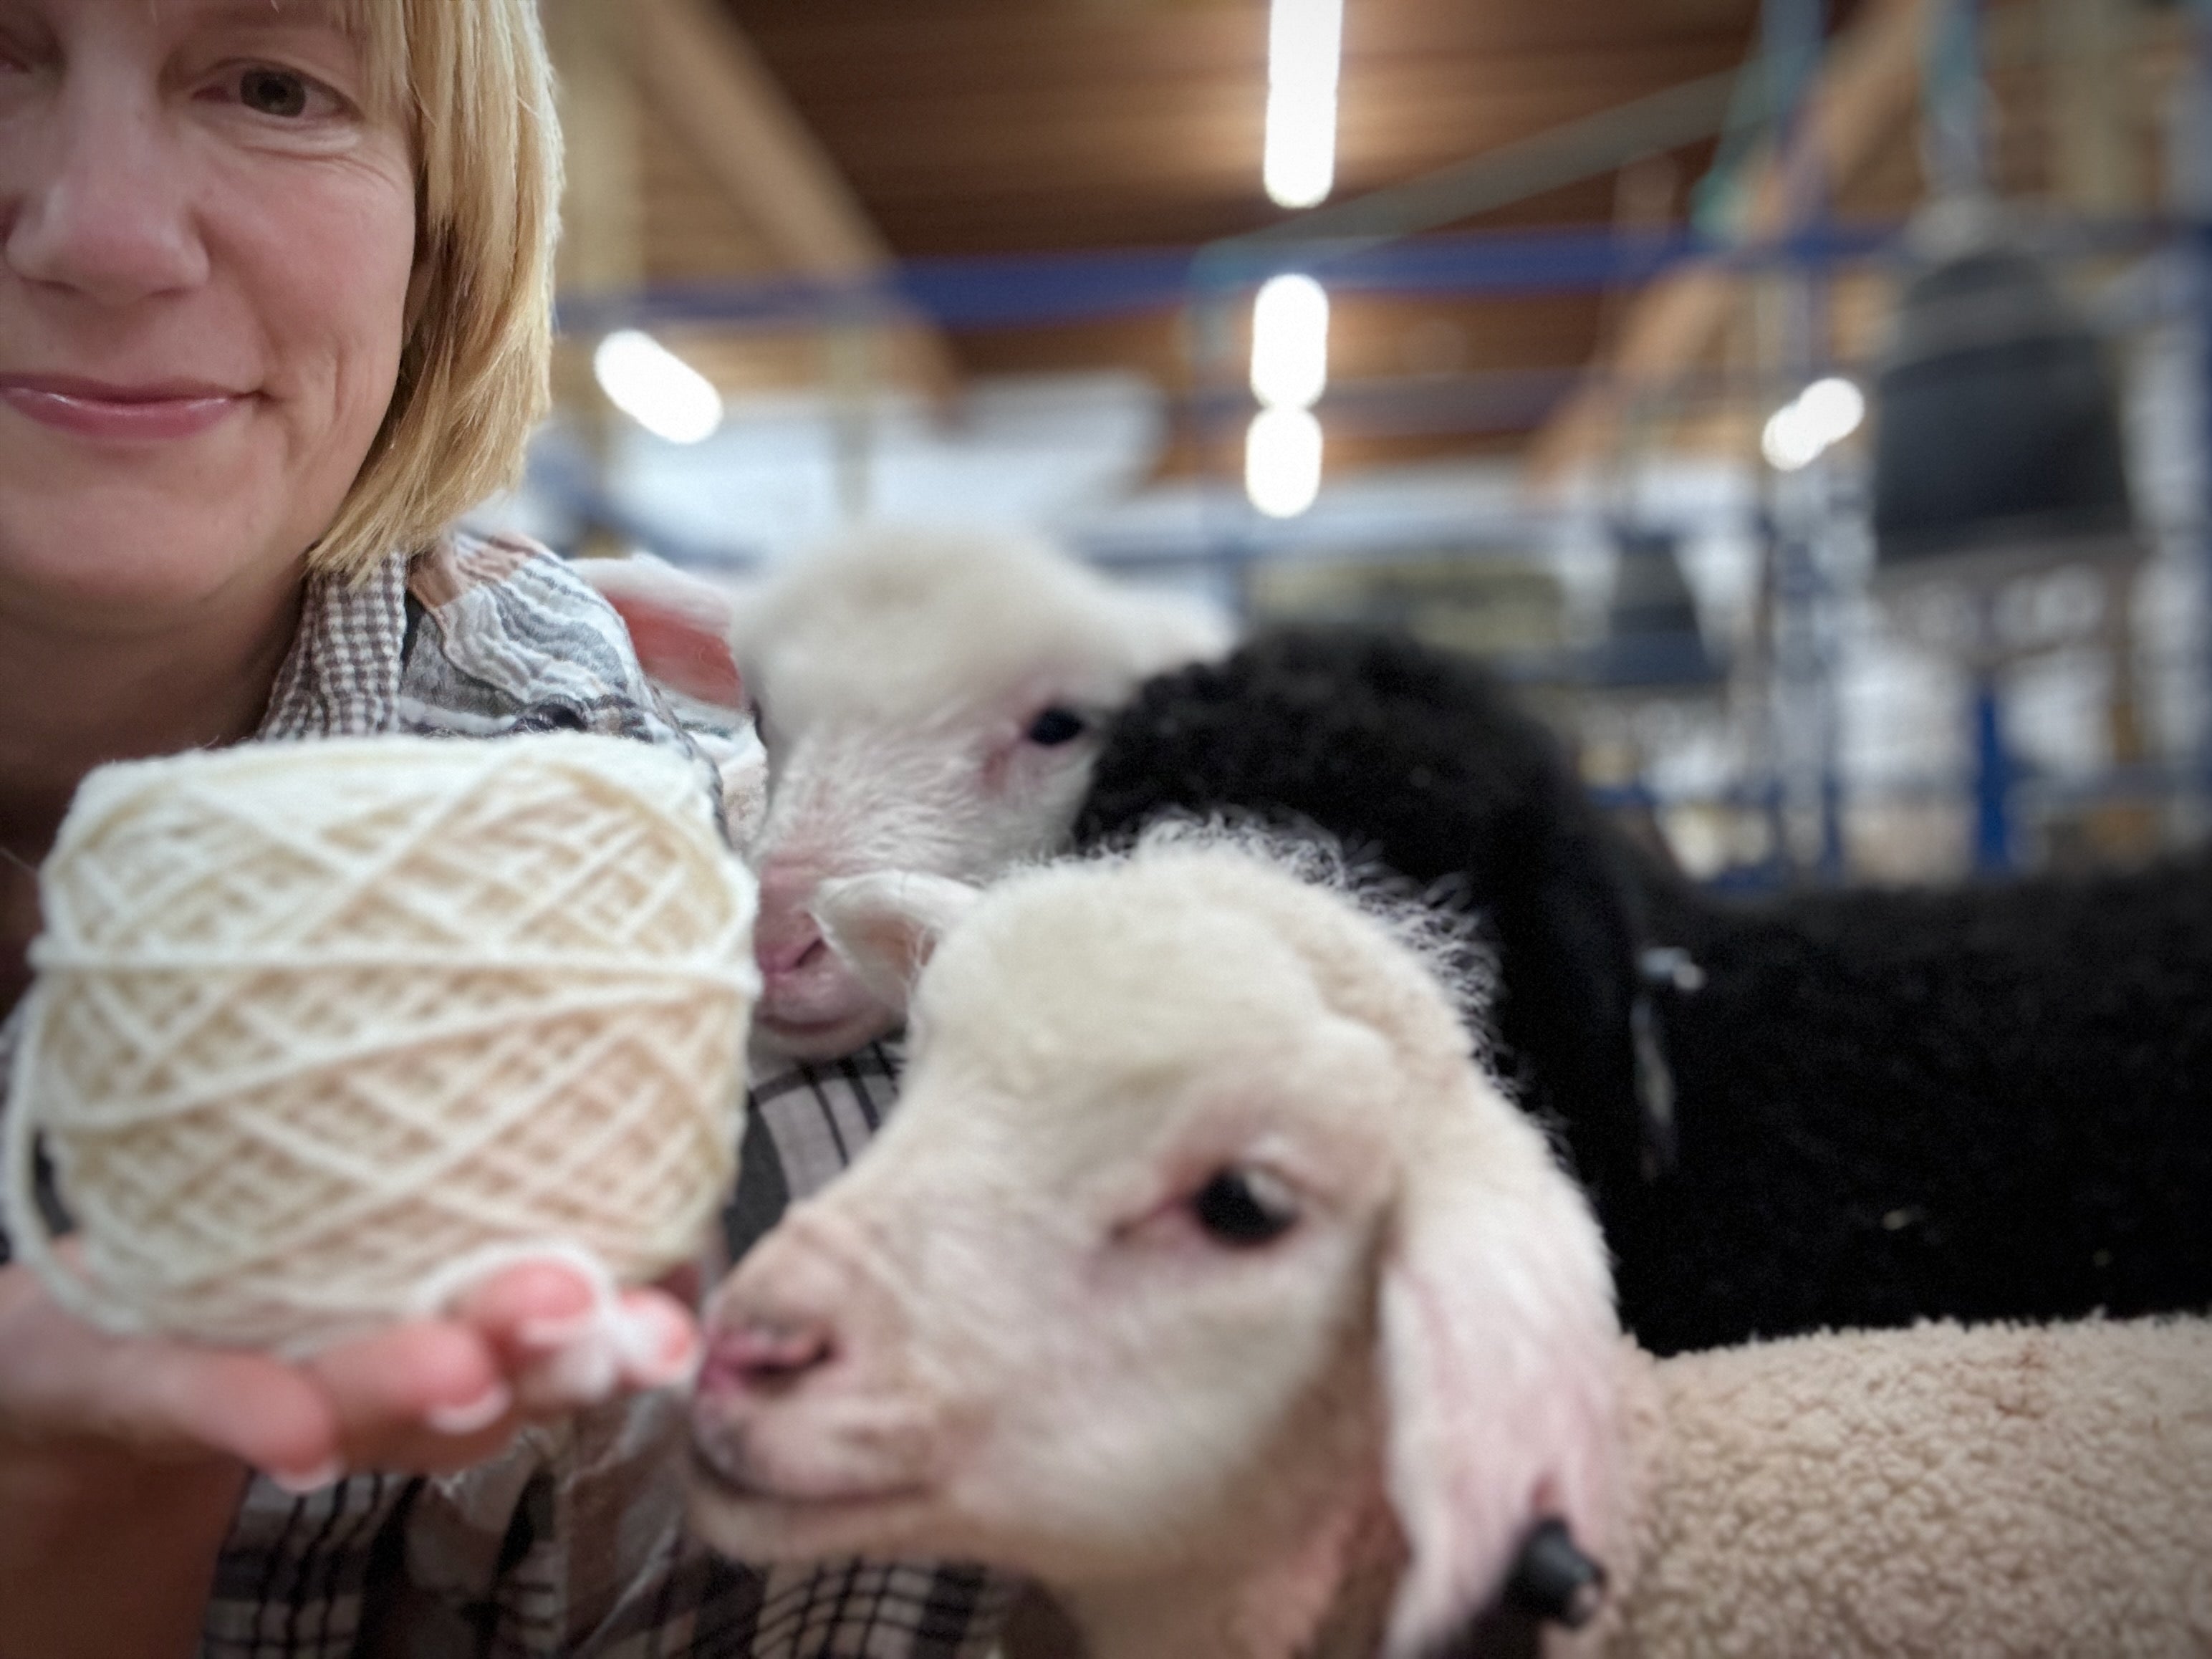 FarmHER Sherry holds a cake of yarn while curious lambs inspect it